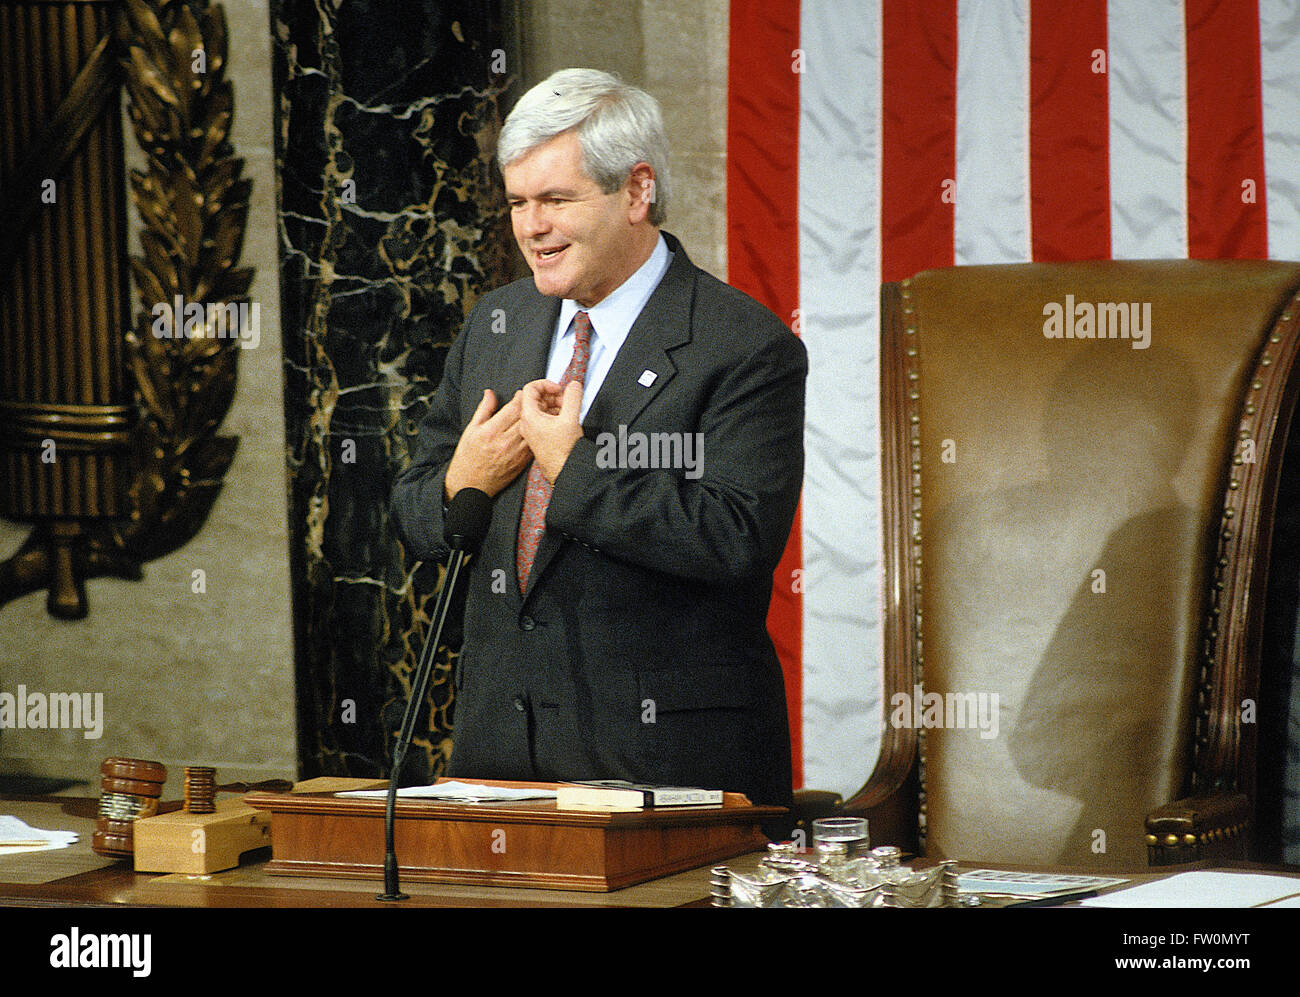 Washington, DC., USA, 4th January, 1995 Congressman Newt Gingrich is sworn in as the first Republican speaker of the House in 40 years during the opening session of the 104th U.S. Congress in Washington, D.C.,  He represented Georgia's 6th congressional district as a Republican from 1979 until his resignation in 1999, and served as the 58th Speaker of the U.S. House of Representatives from 1995 to 1999. Gingrich was a candidate for the 2012 Republican Party presidential nomination. Credit: Mark Reinstein Stock Photo